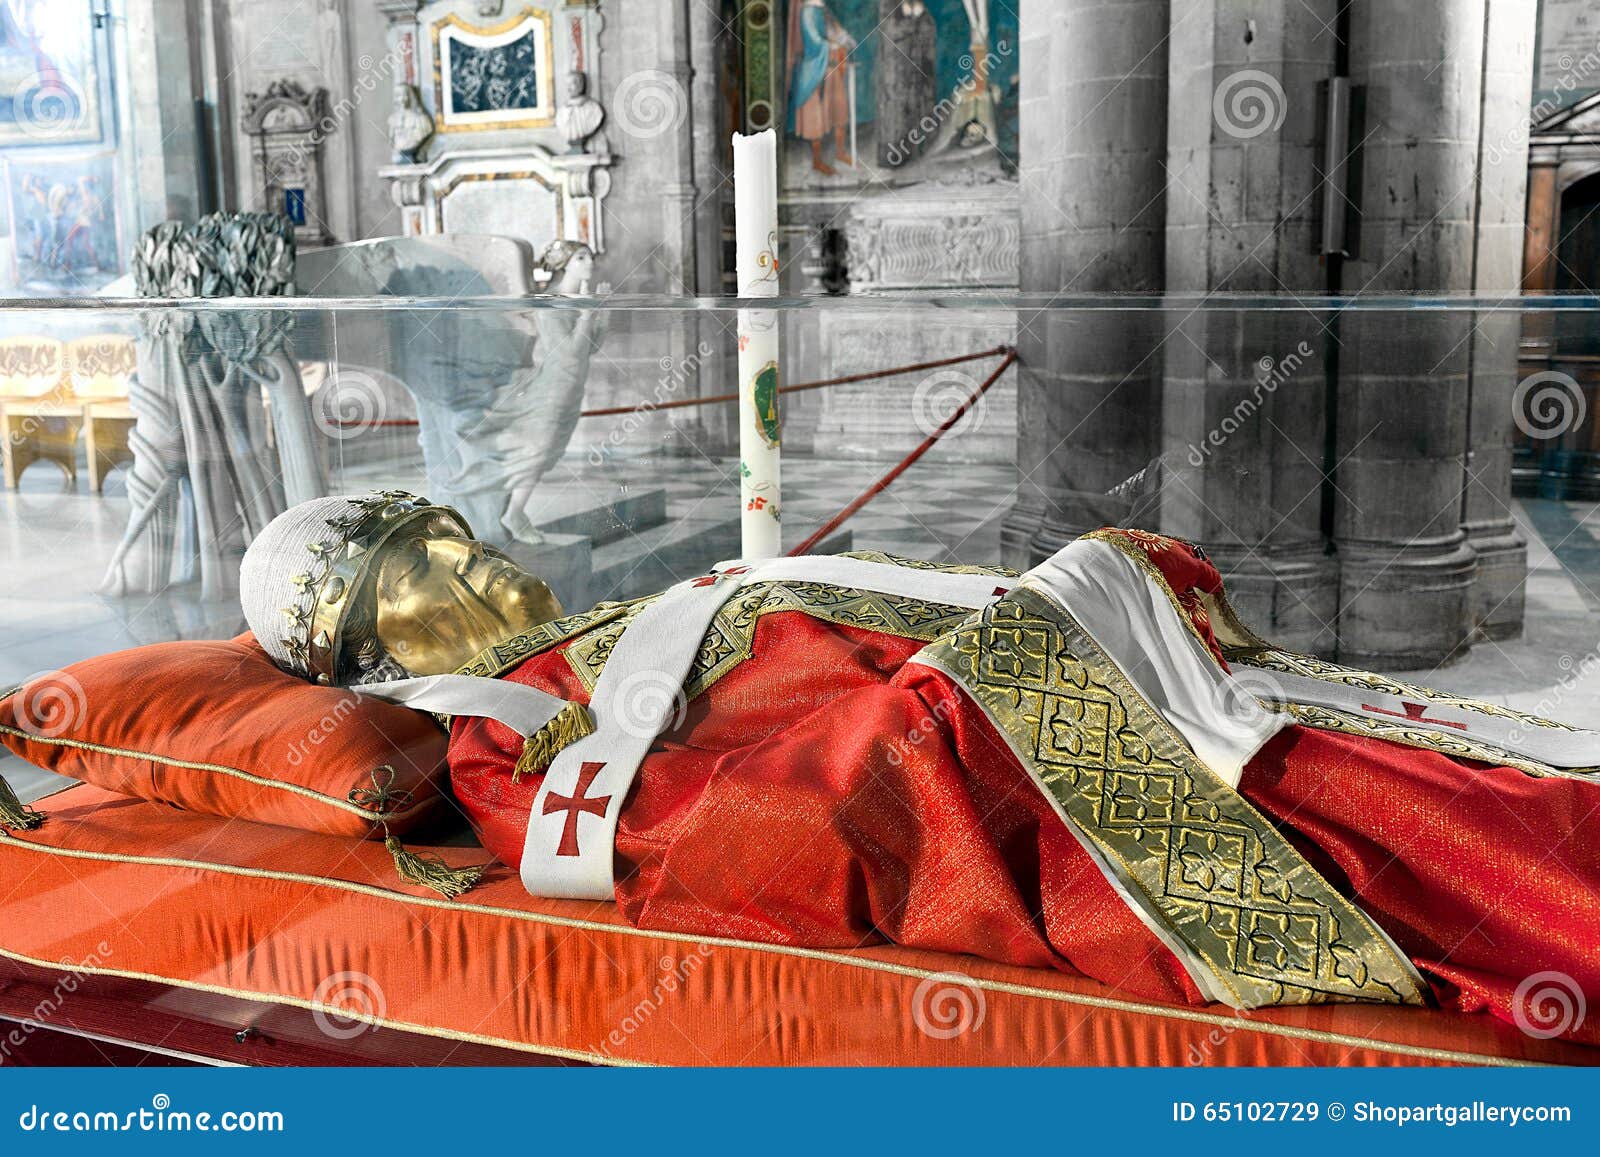 the effigy of pope gregory x